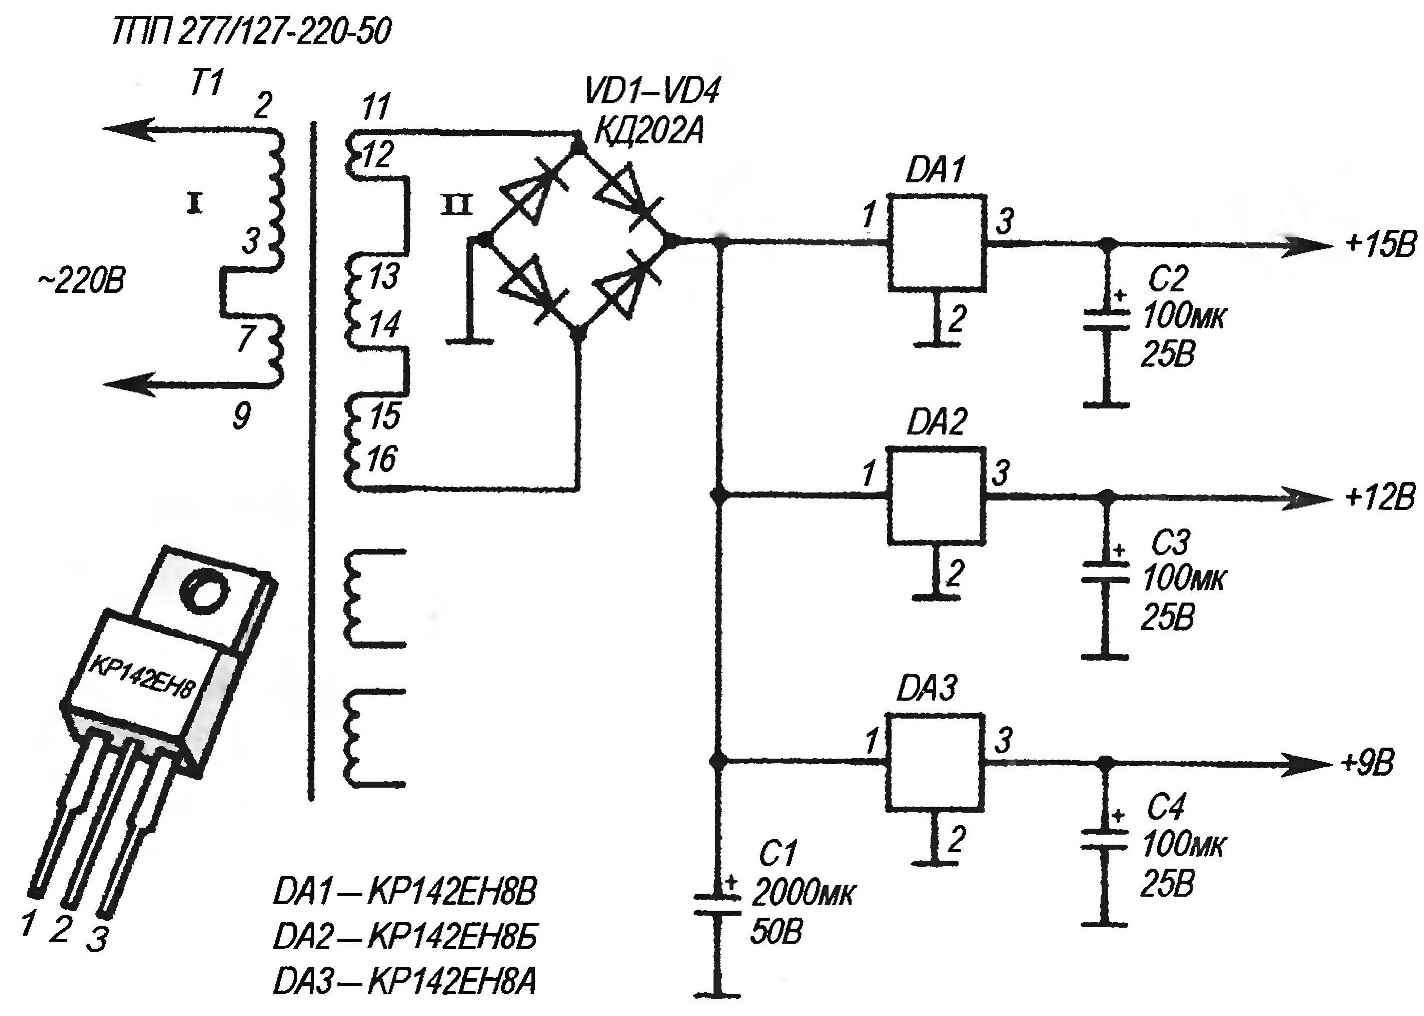 Electrical schematic a powerful, stabilized 